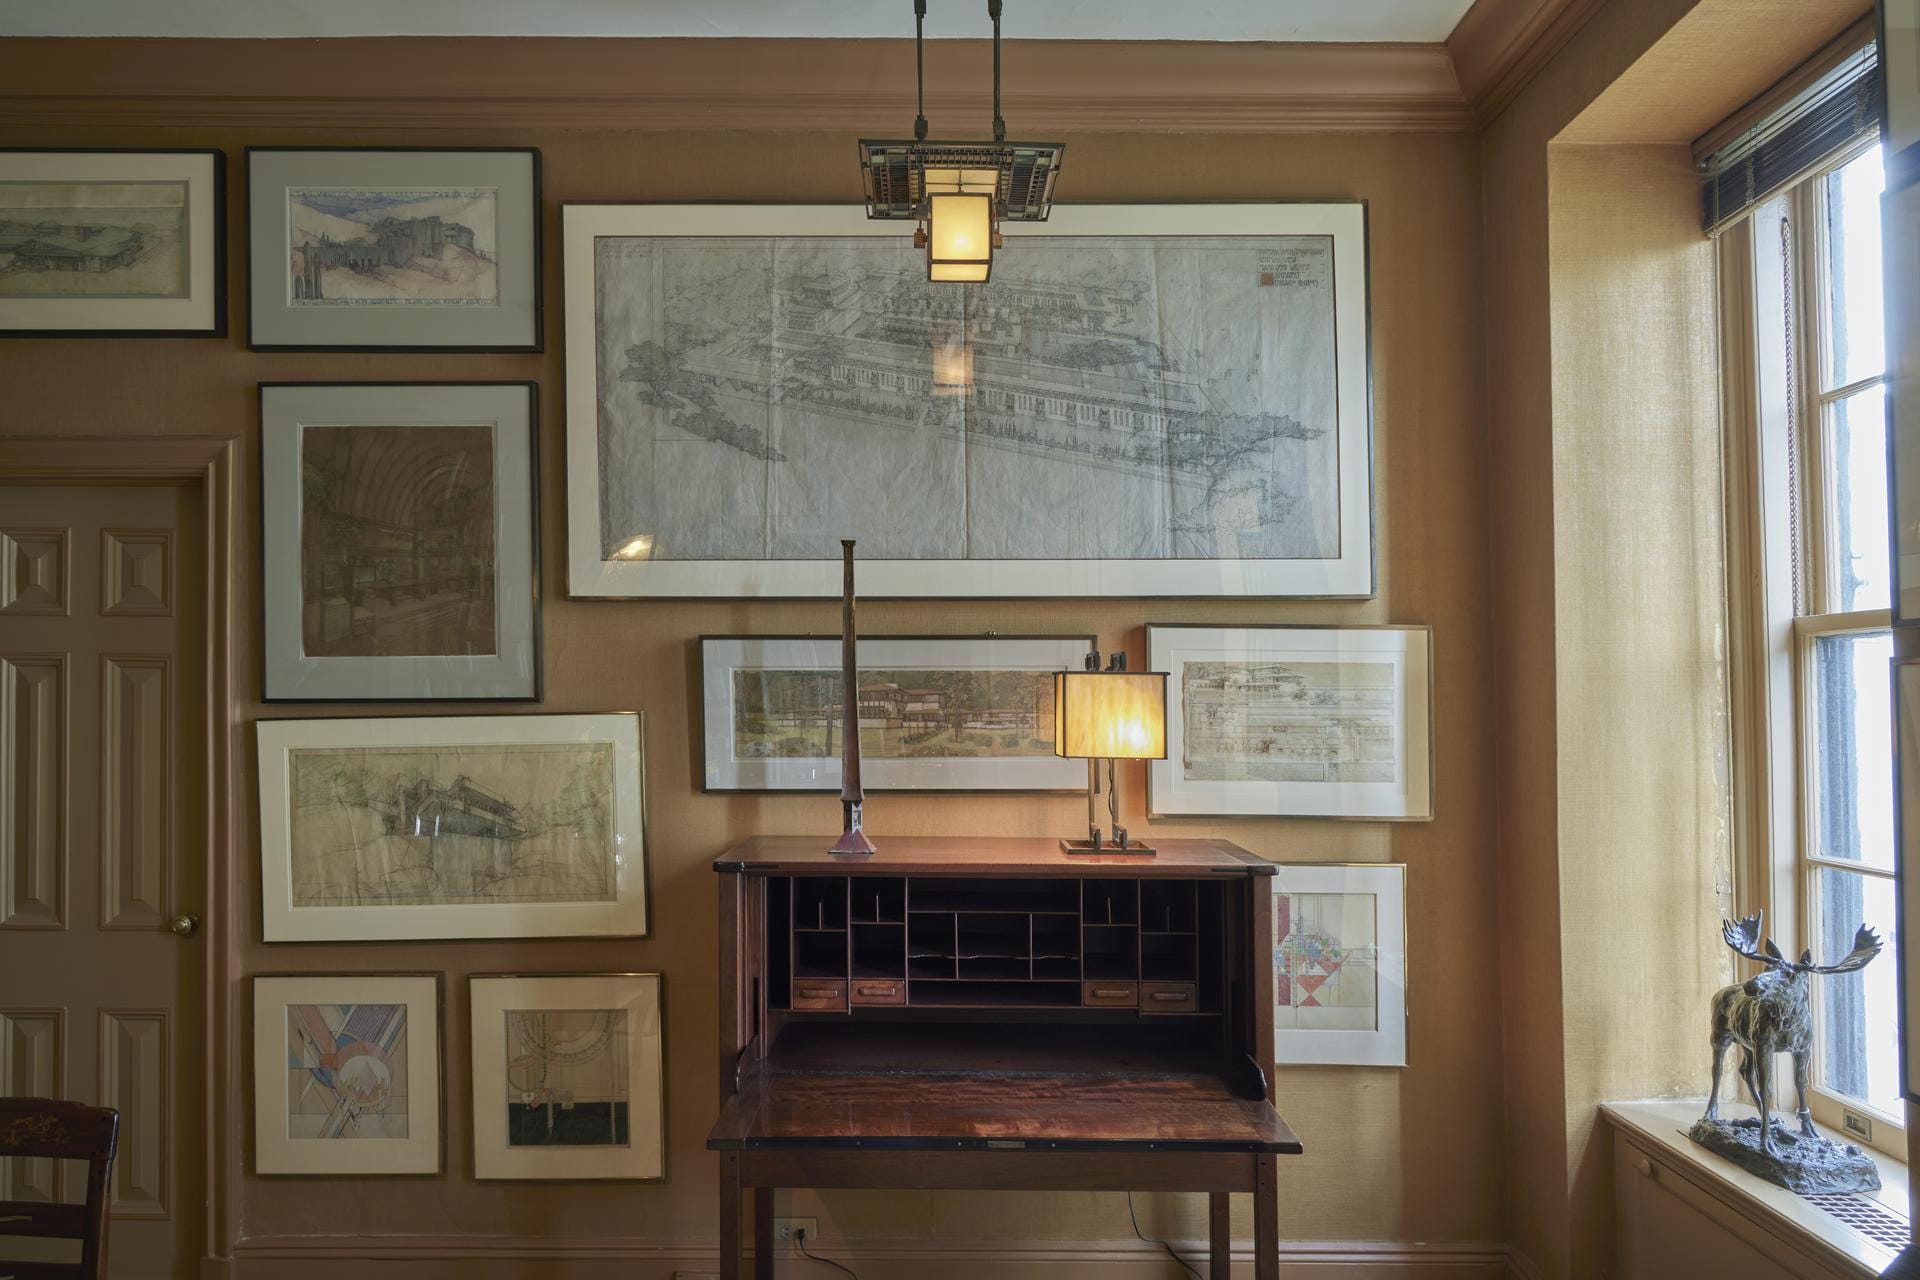 From top to bottom: Frank Lloyd Wright’s Ceiling Light from the Francis W. Little House; Architectural renderings by Frank Lloyd Wright; Greene & Greene Fall Front Desk and Chair from the Charles Millard Pratt House